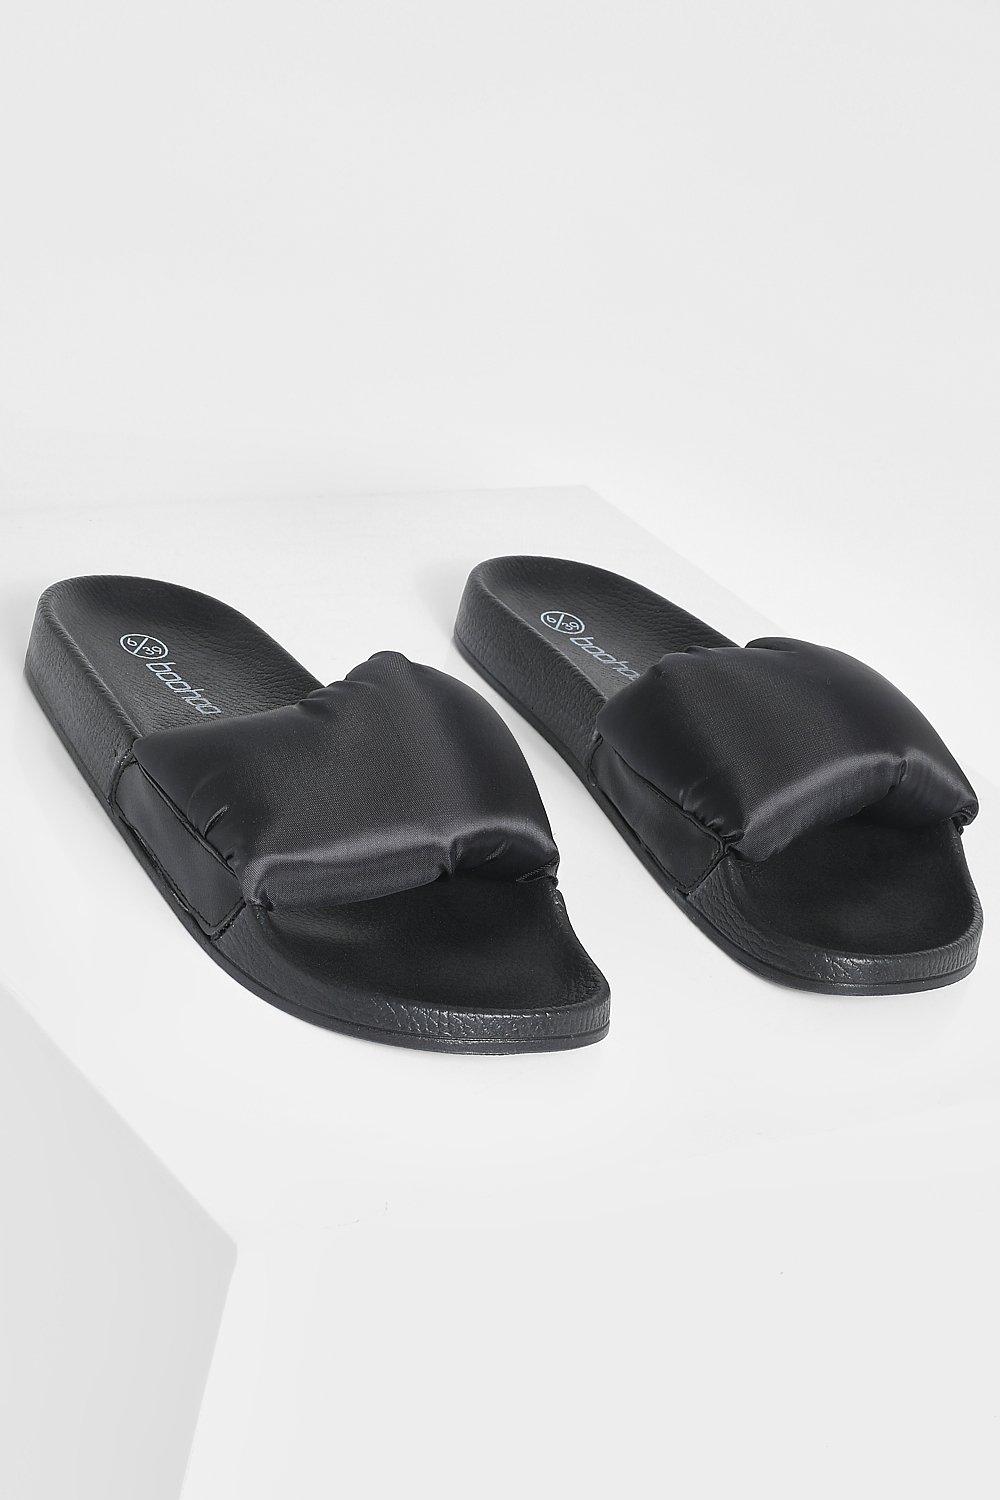 Boohoo Synthetic Padded Nylon Slider in Black Womens Shoes Flats and flat shoes Flat sandals 